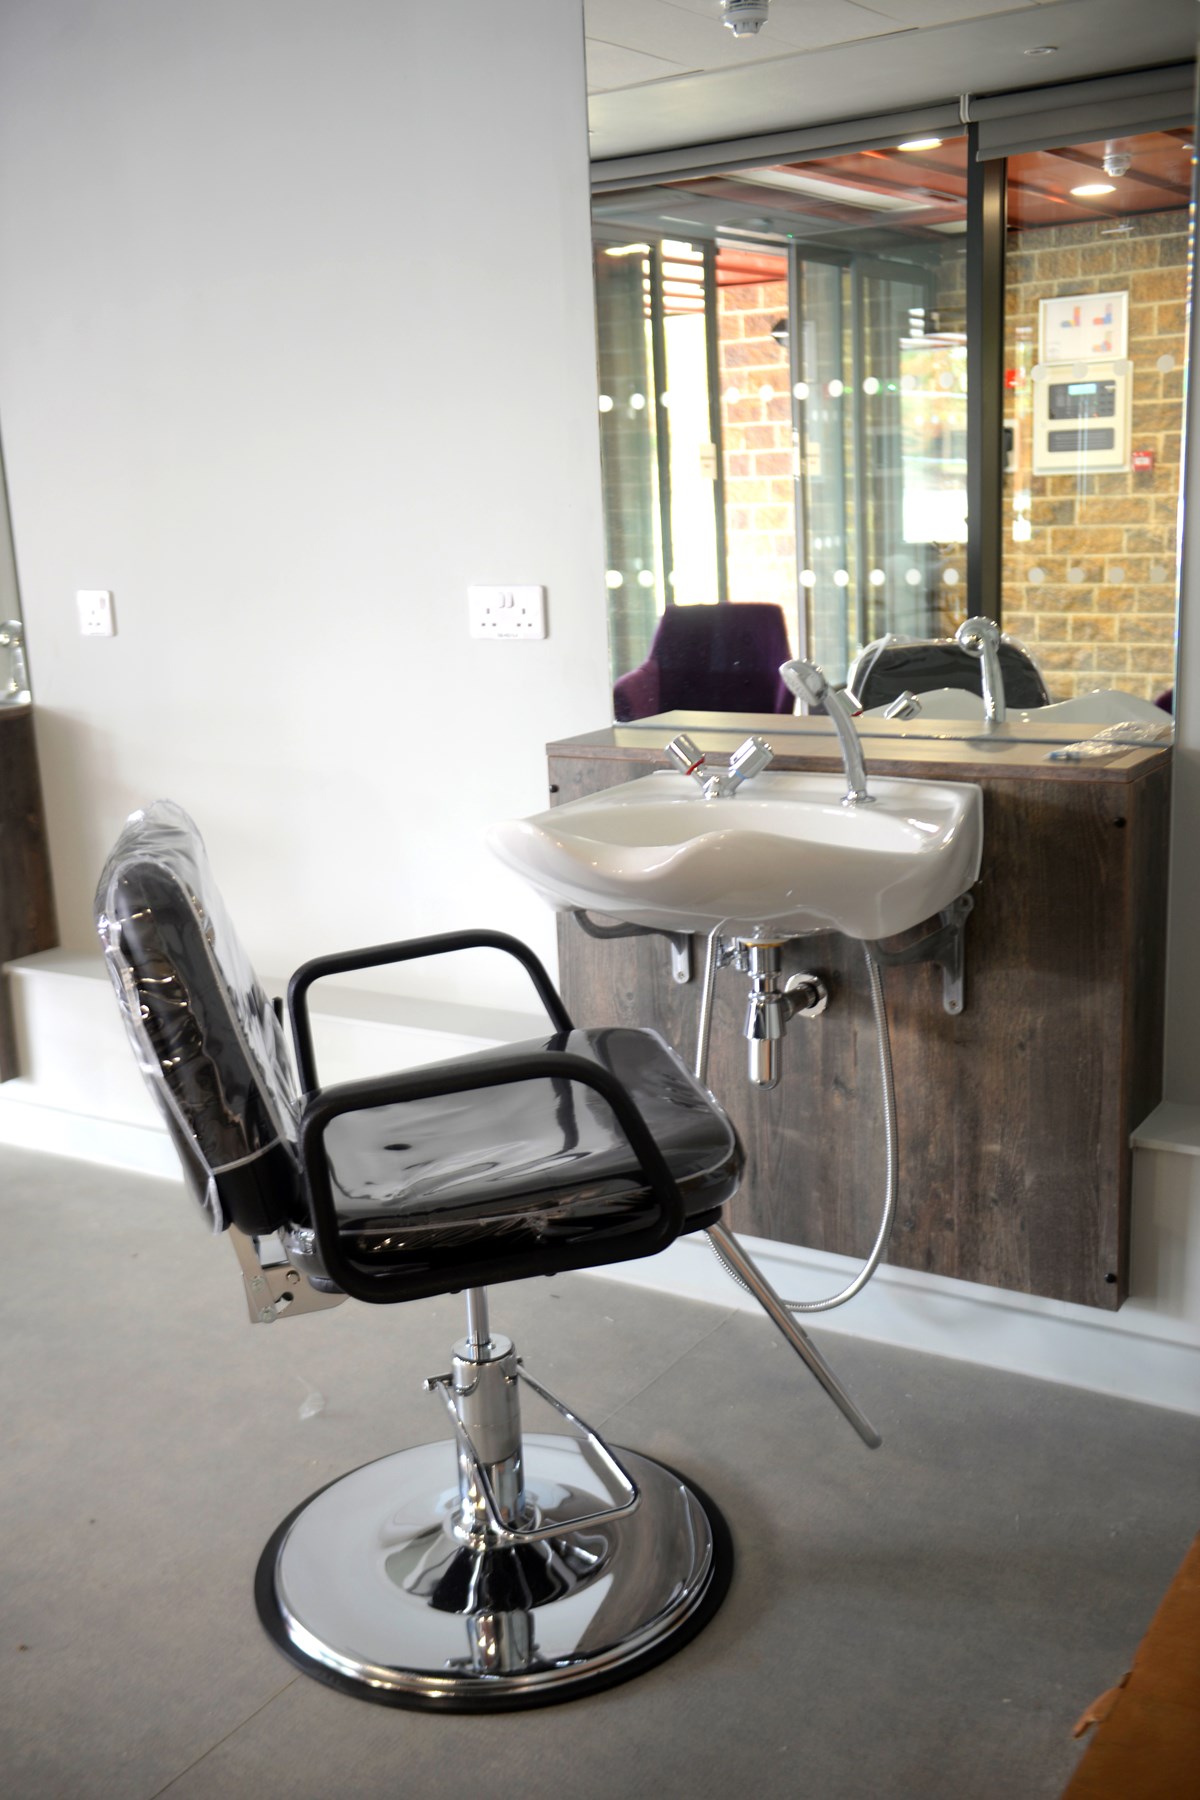 Part of the hairdressing salon at the new care home at Bowgreave Rise in Garstang